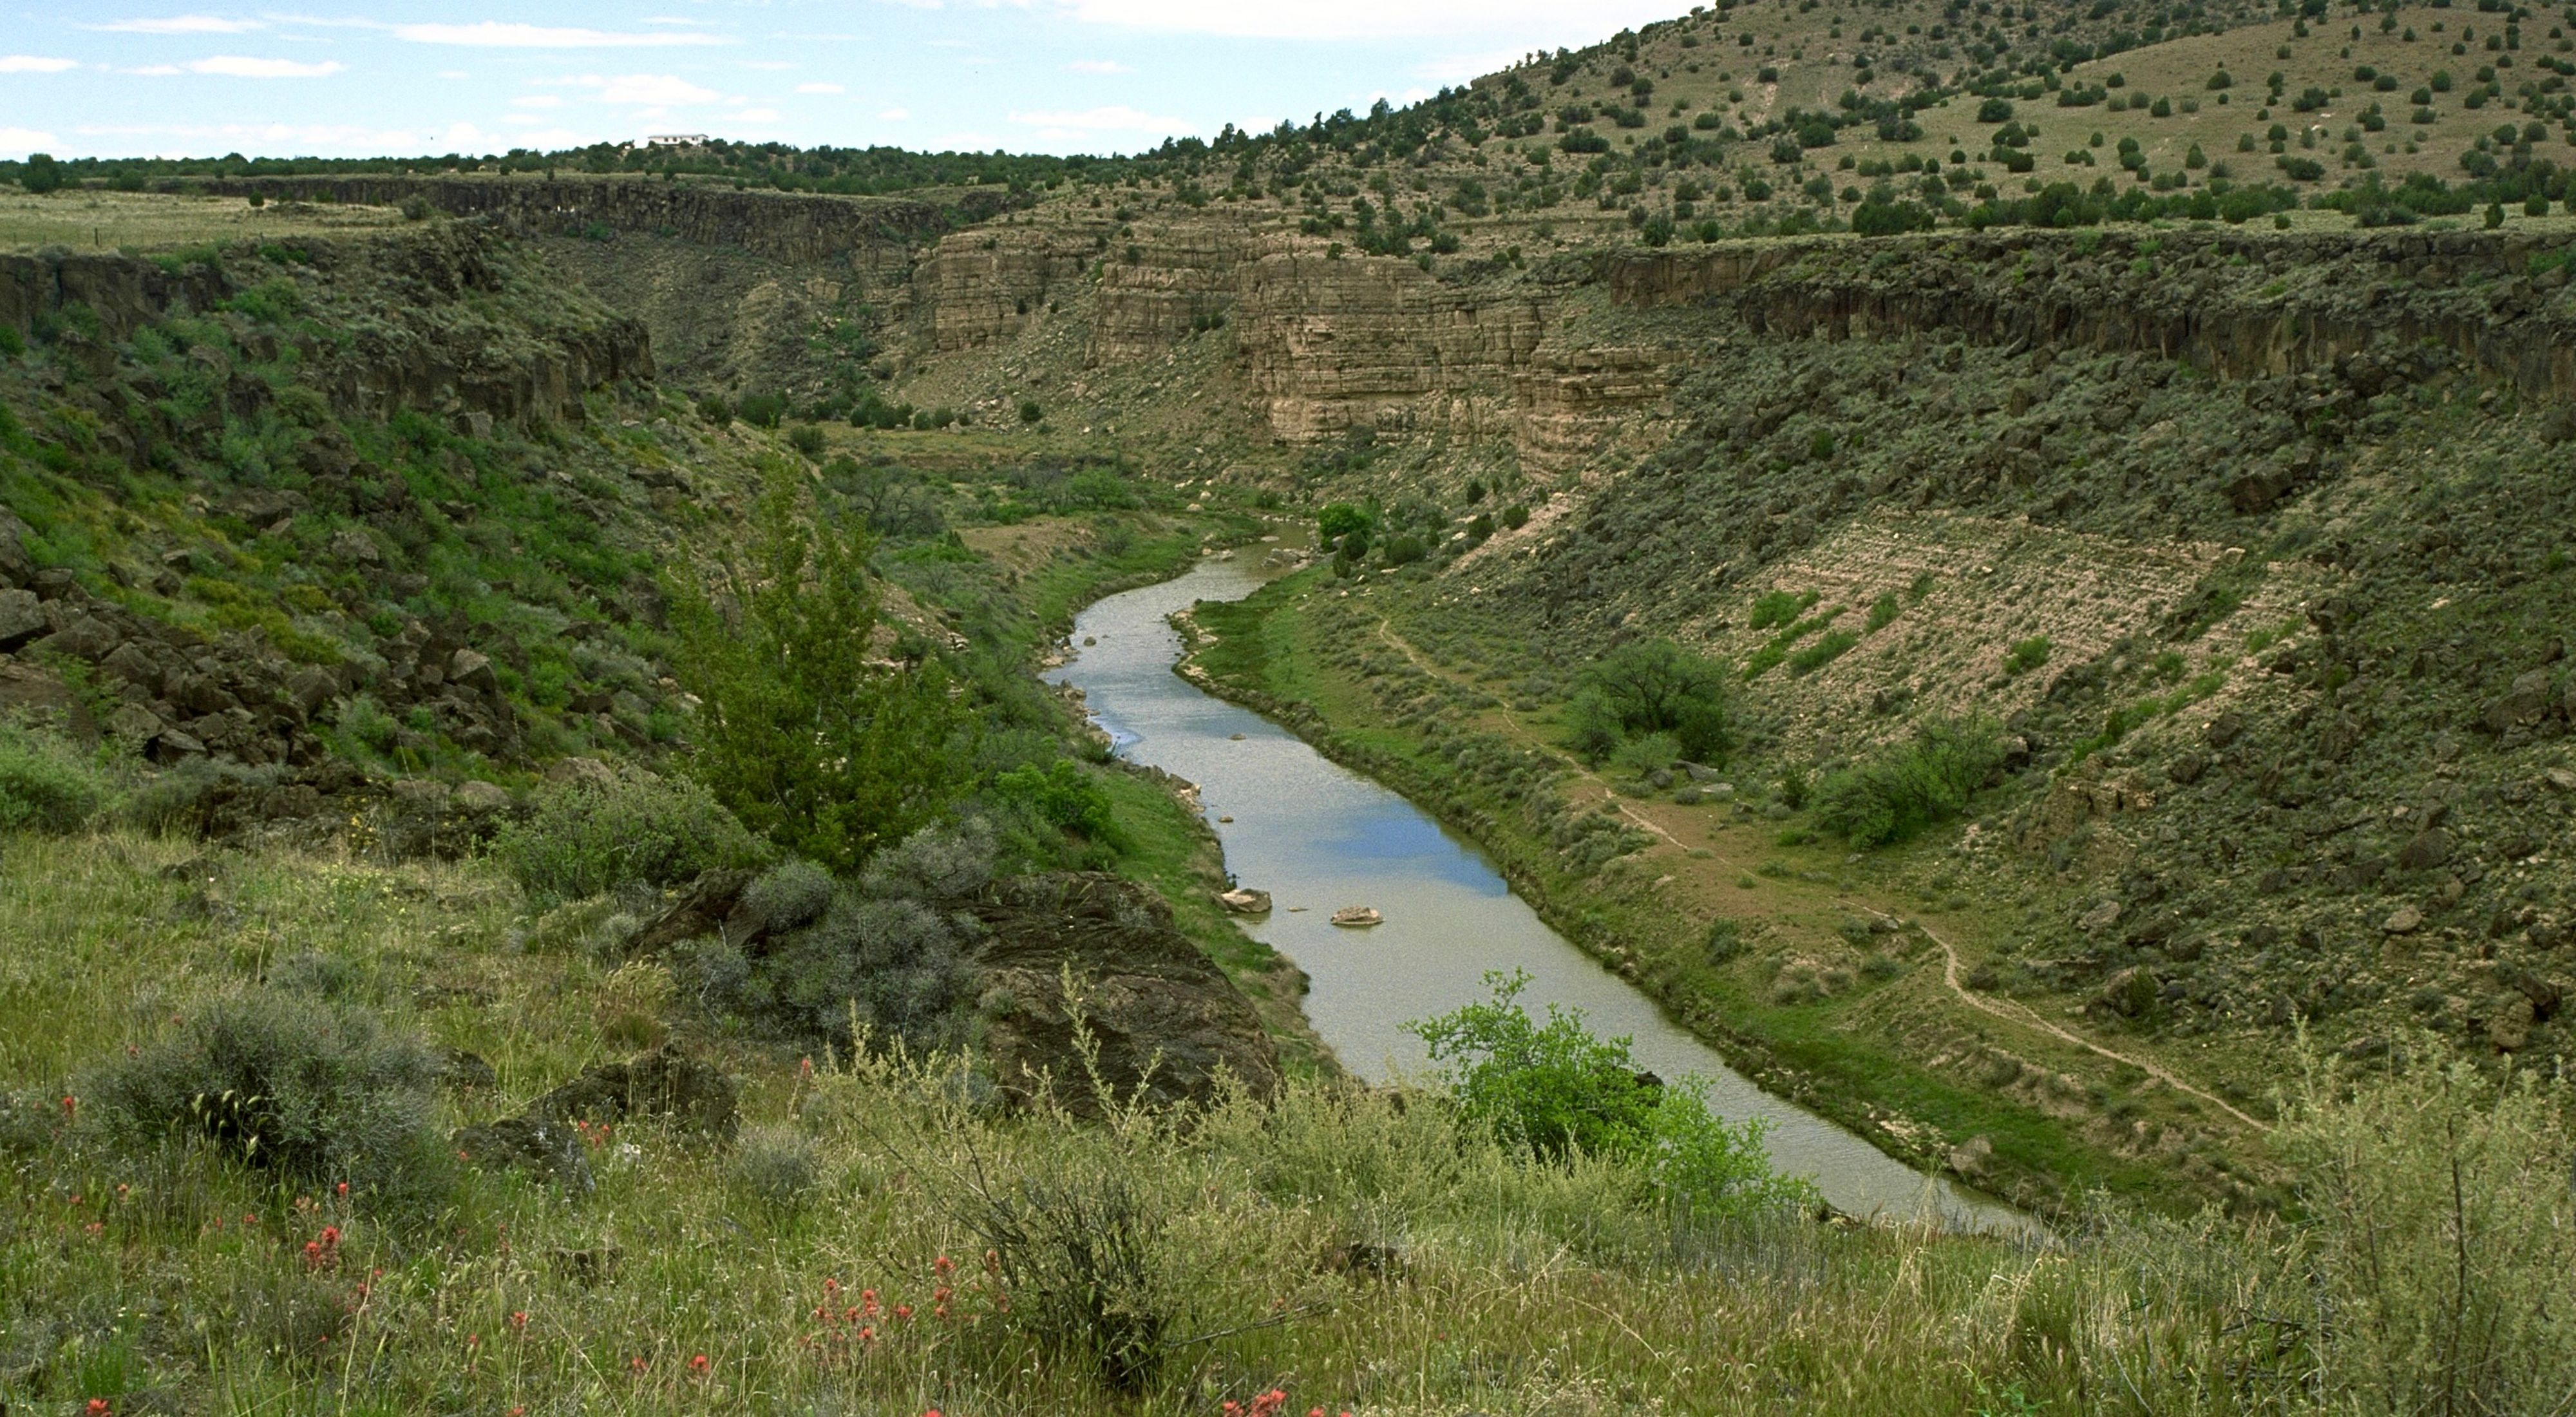 View of the Upper Verde River, a stream of water with elevated vegetation on either side.